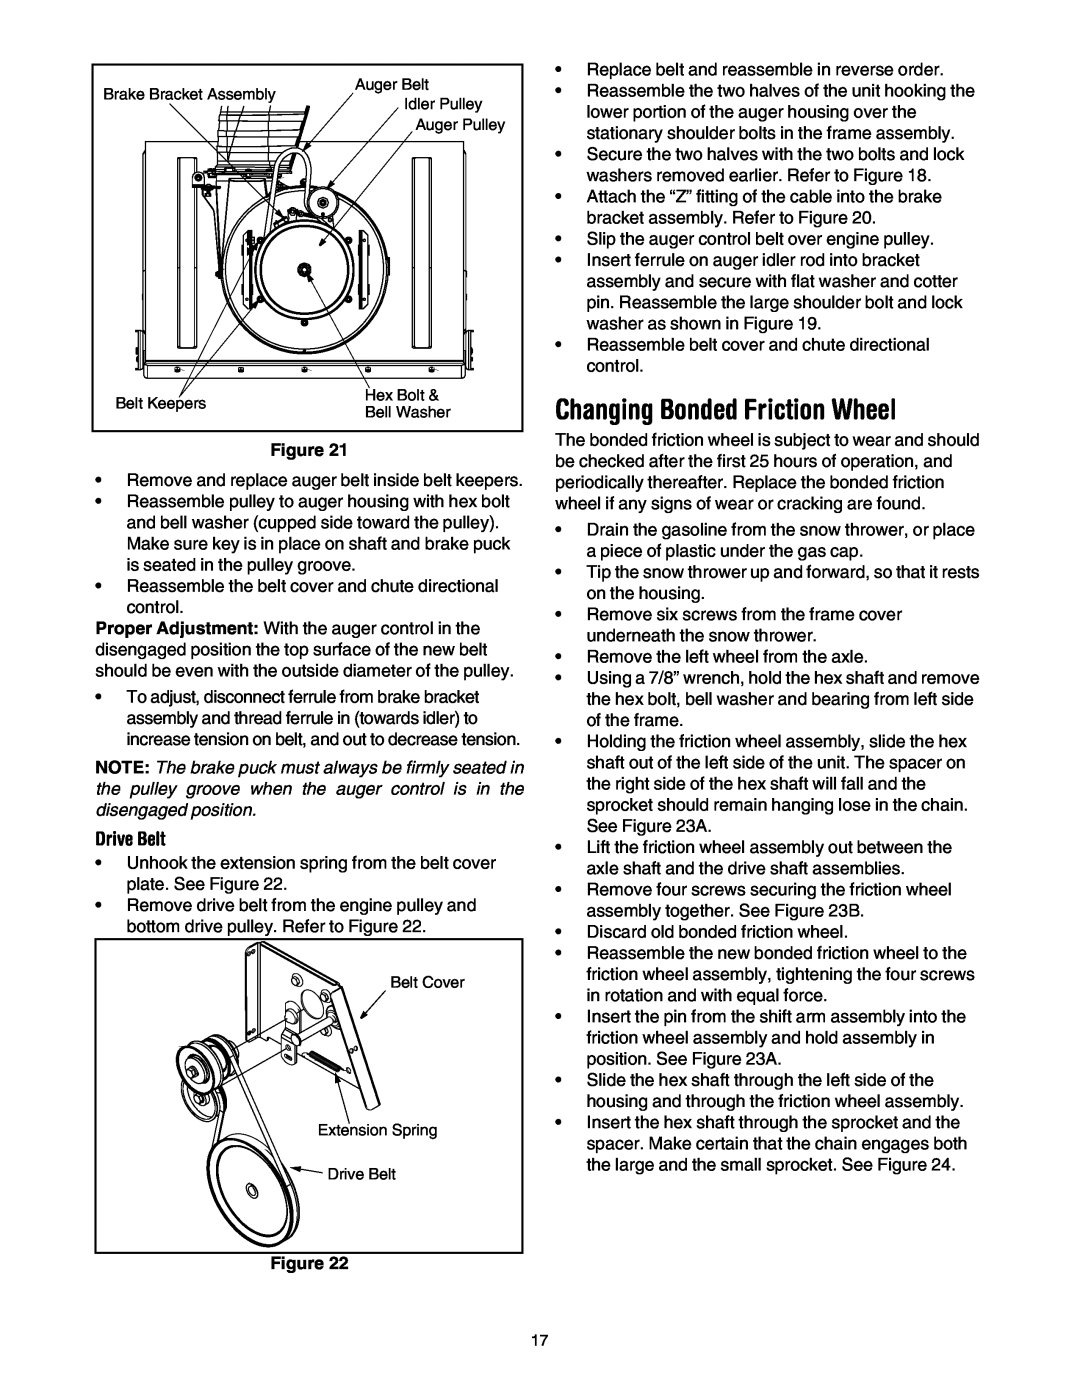 Troy-Bilt 10530 manual Drive Belt, NOTE The brake puck must always be firmly seated in, disengaged position 